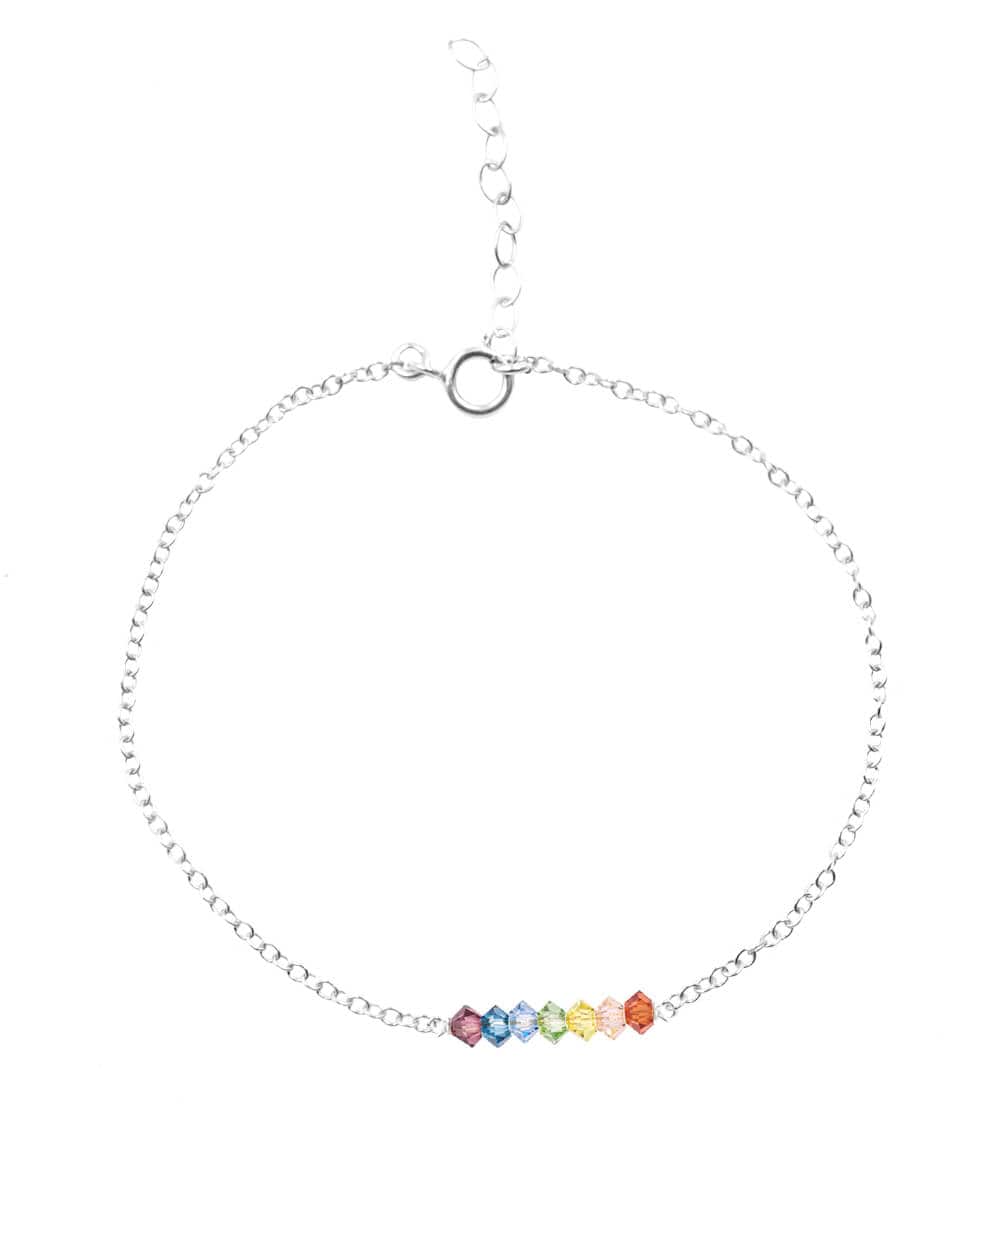 Detail view of The 7 Chakras Bracelet on a Sterling Silver Chain with 7 Swarovski Crystals created by MaeMae Jewelry